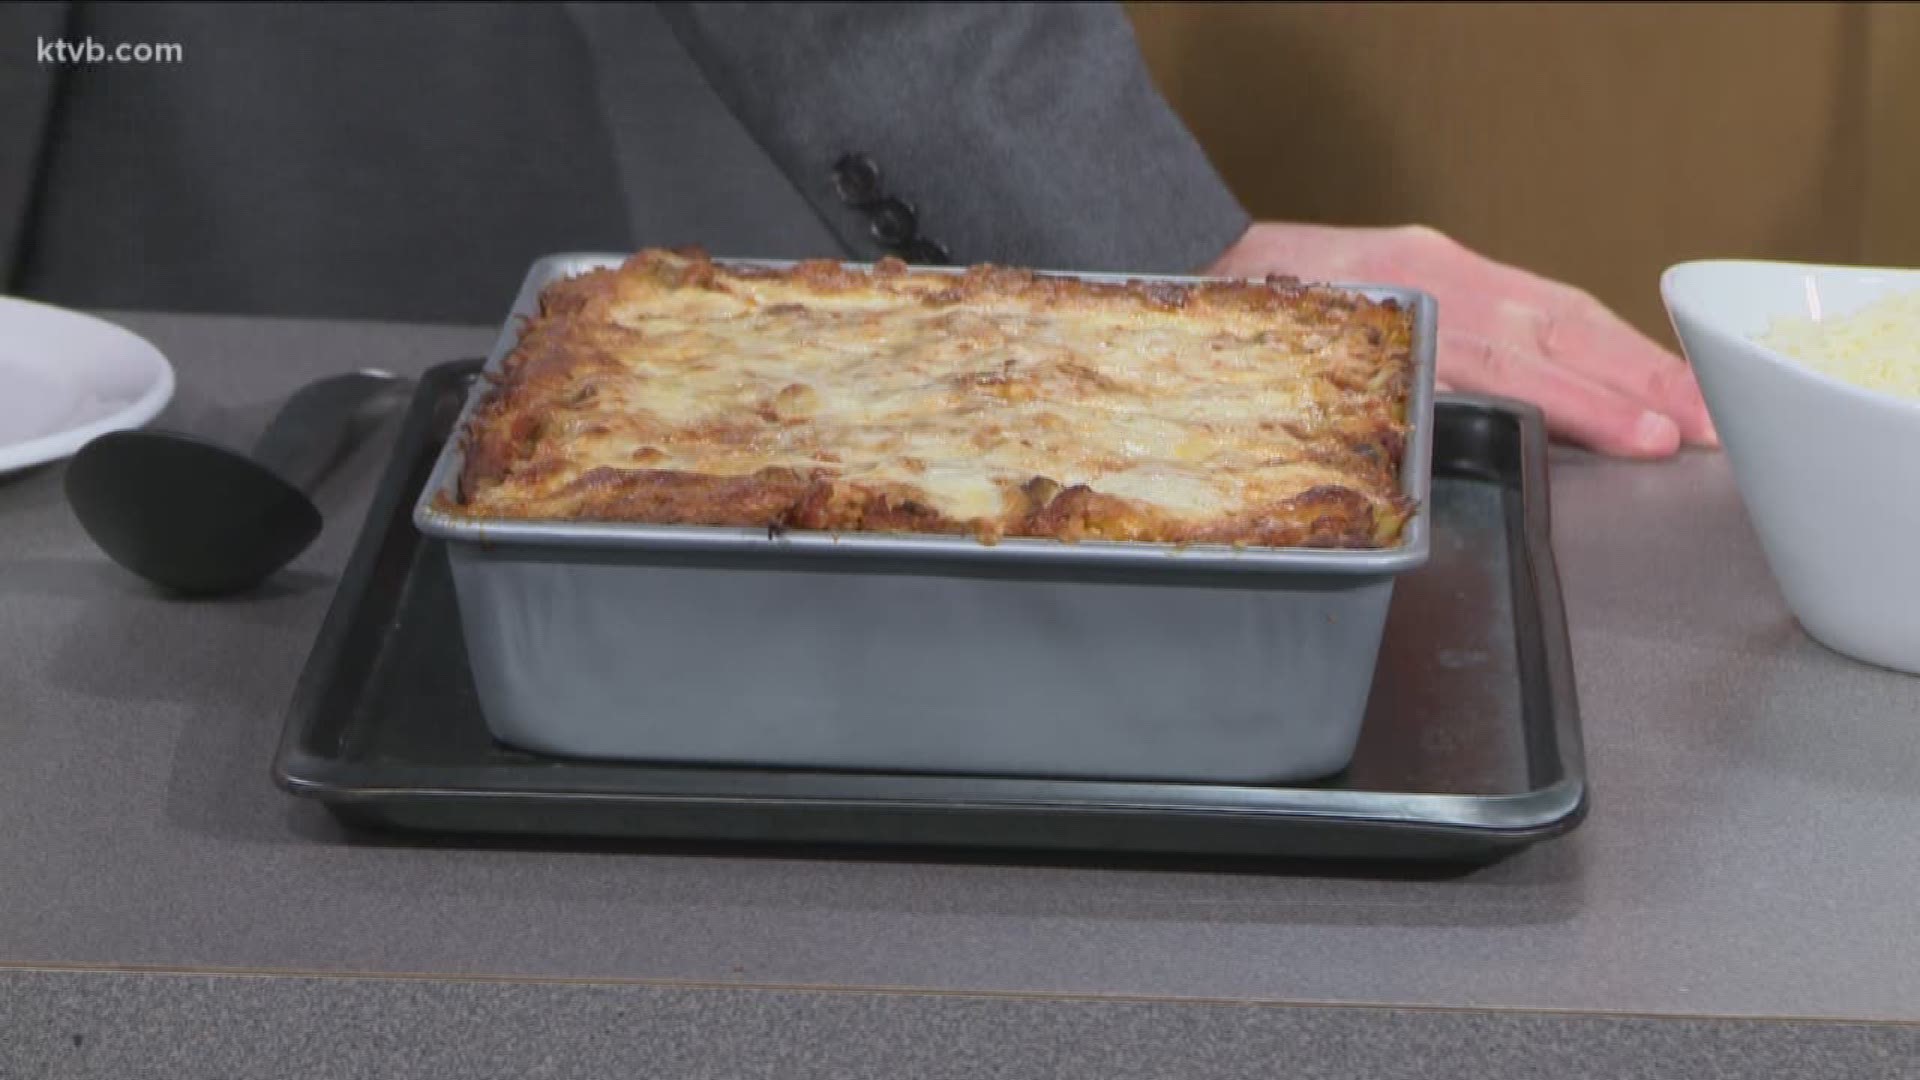 Viewer Thanksgiving recipes: Baked Mostaccioli